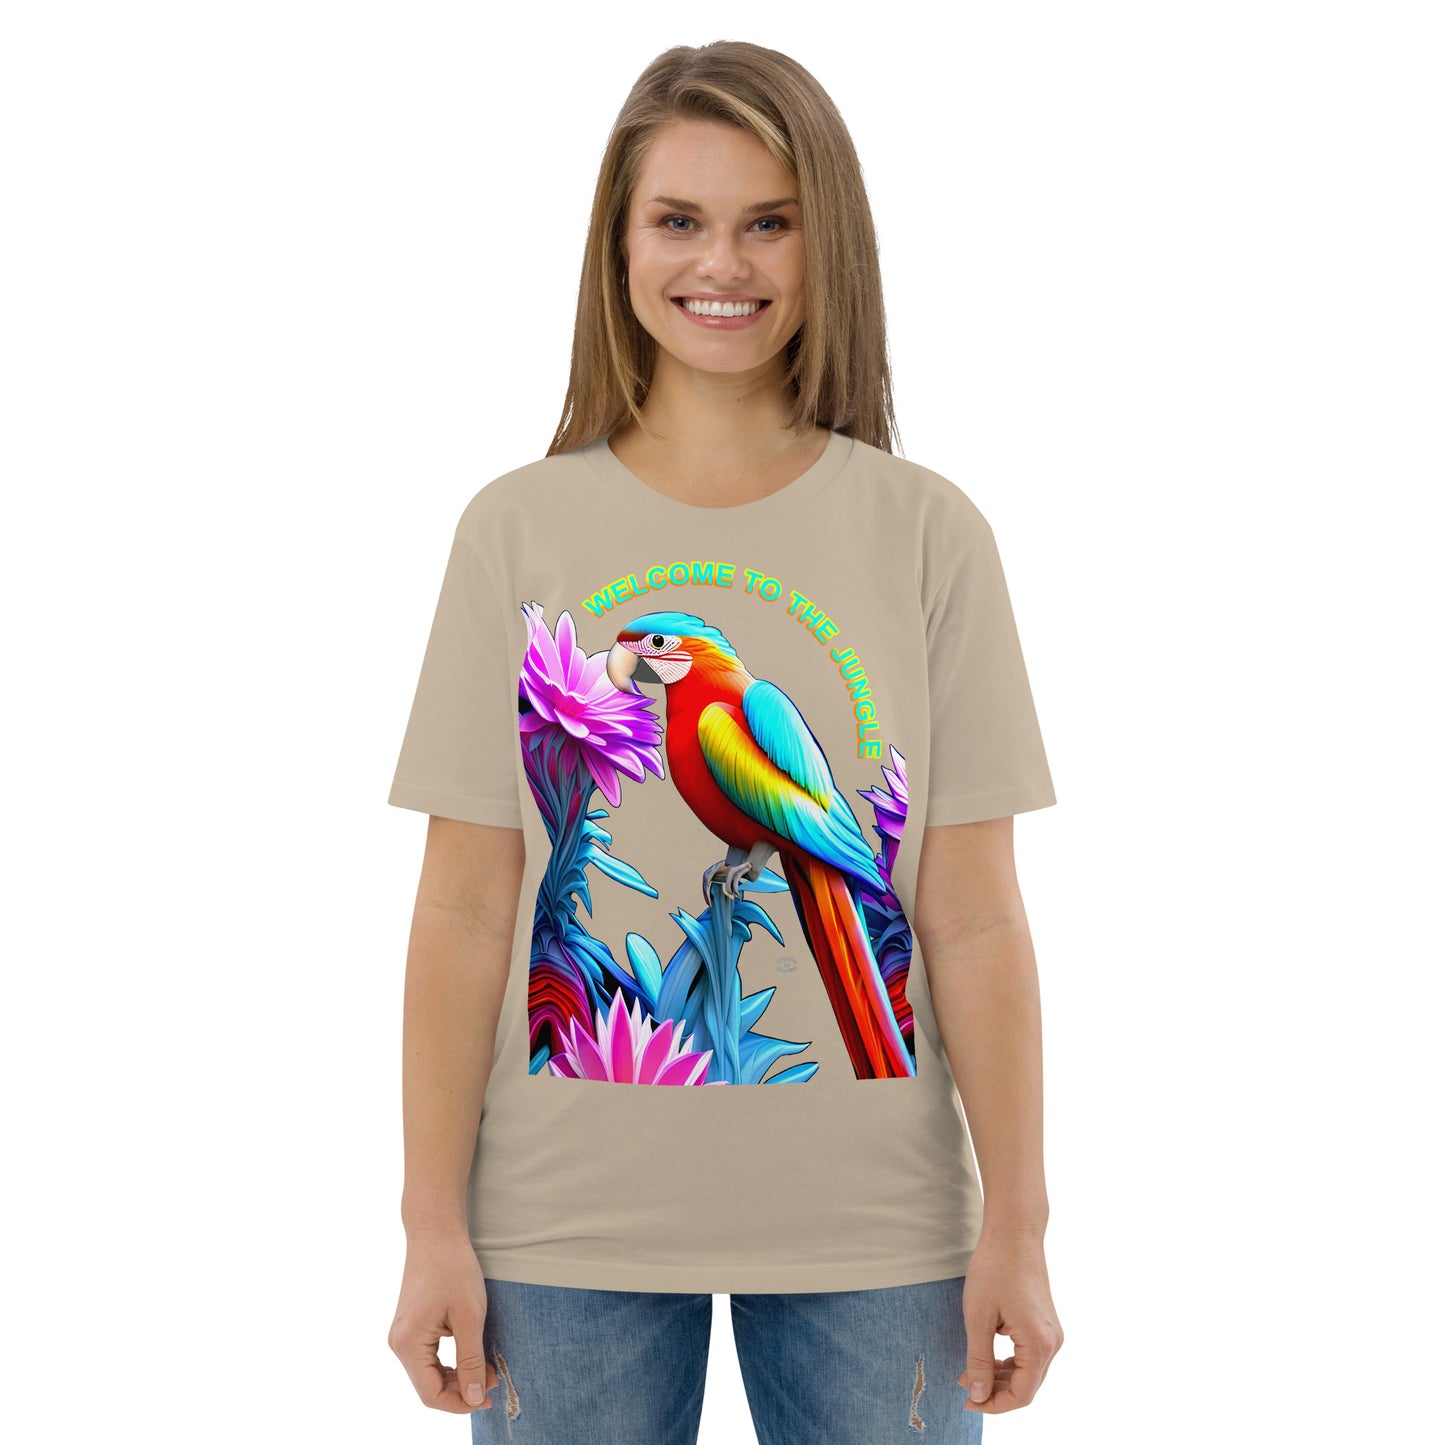 "Jungle Macaw - Welcome To The Jungle" Unisex Organic Cotton T-Shirt